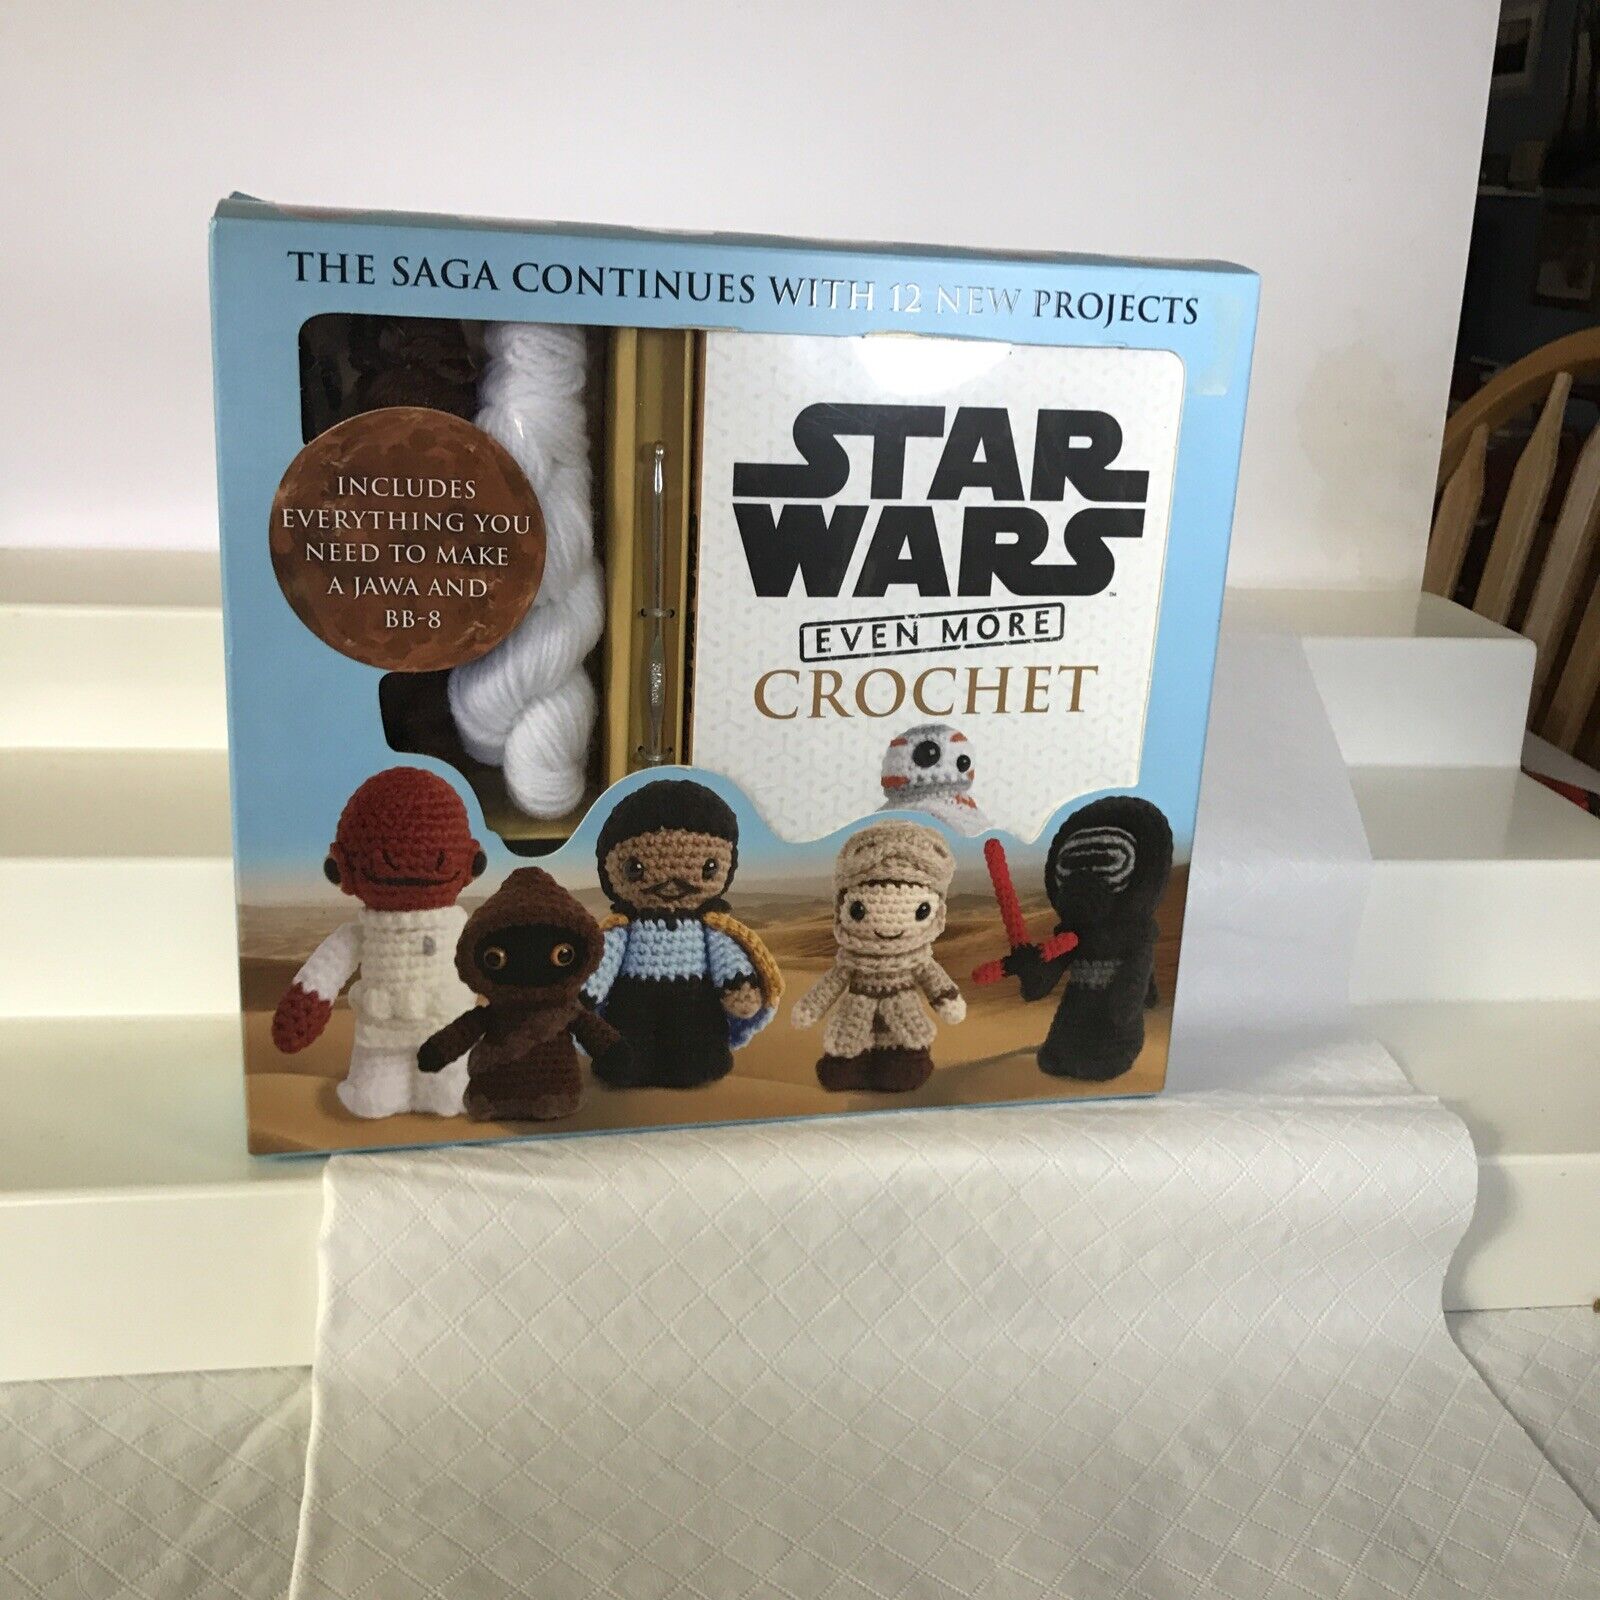 Star Wars Even More Crochet Kit Lucy Collin NEW The Force Awakens Jawa BB-8 Rey